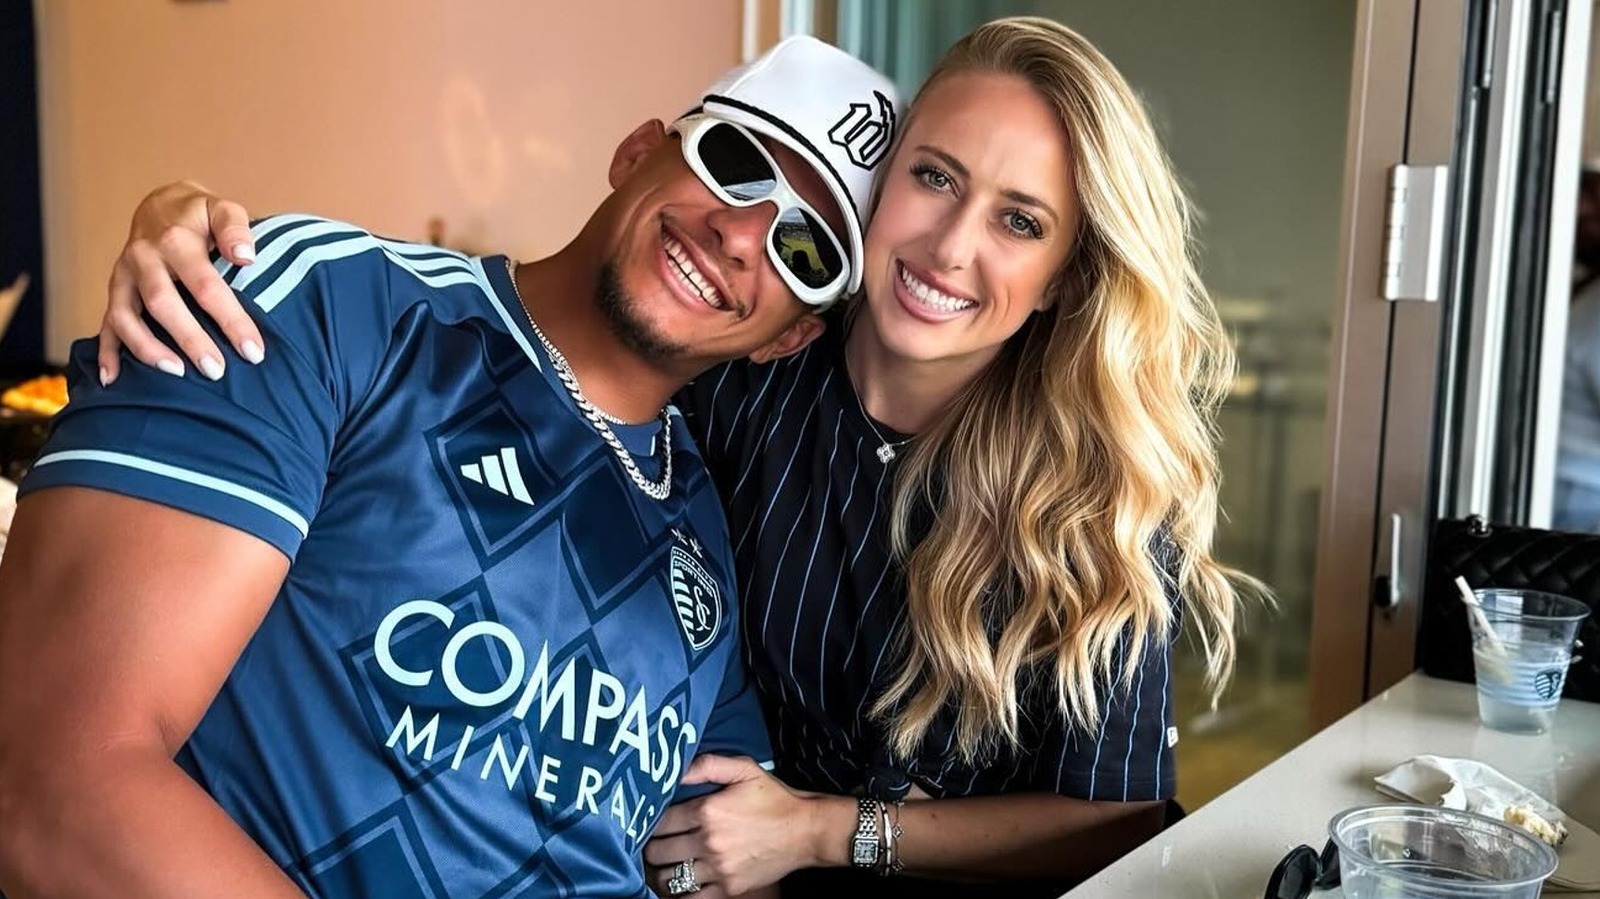 Brittany Mahomes' Latest Matchy-Matchy Date Night Outfits With Patrick Are So Telling